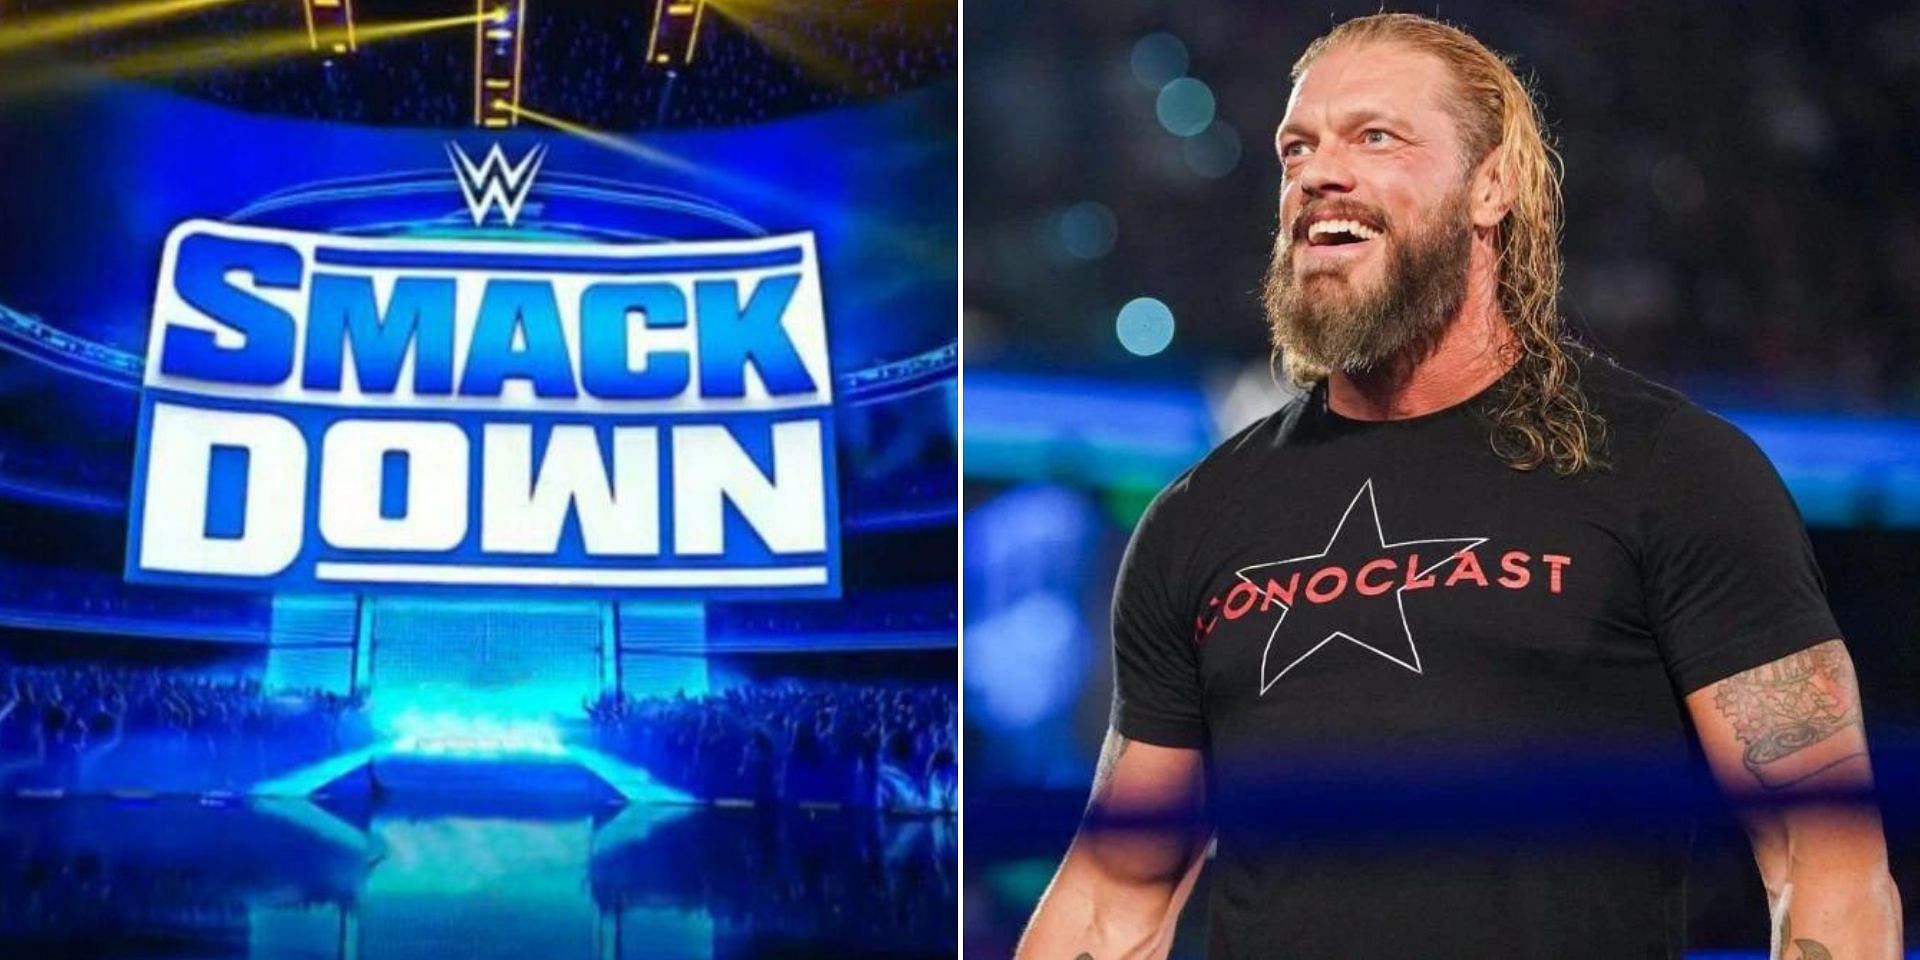 Edge will appear on an episode of SmackDown in Toronto 